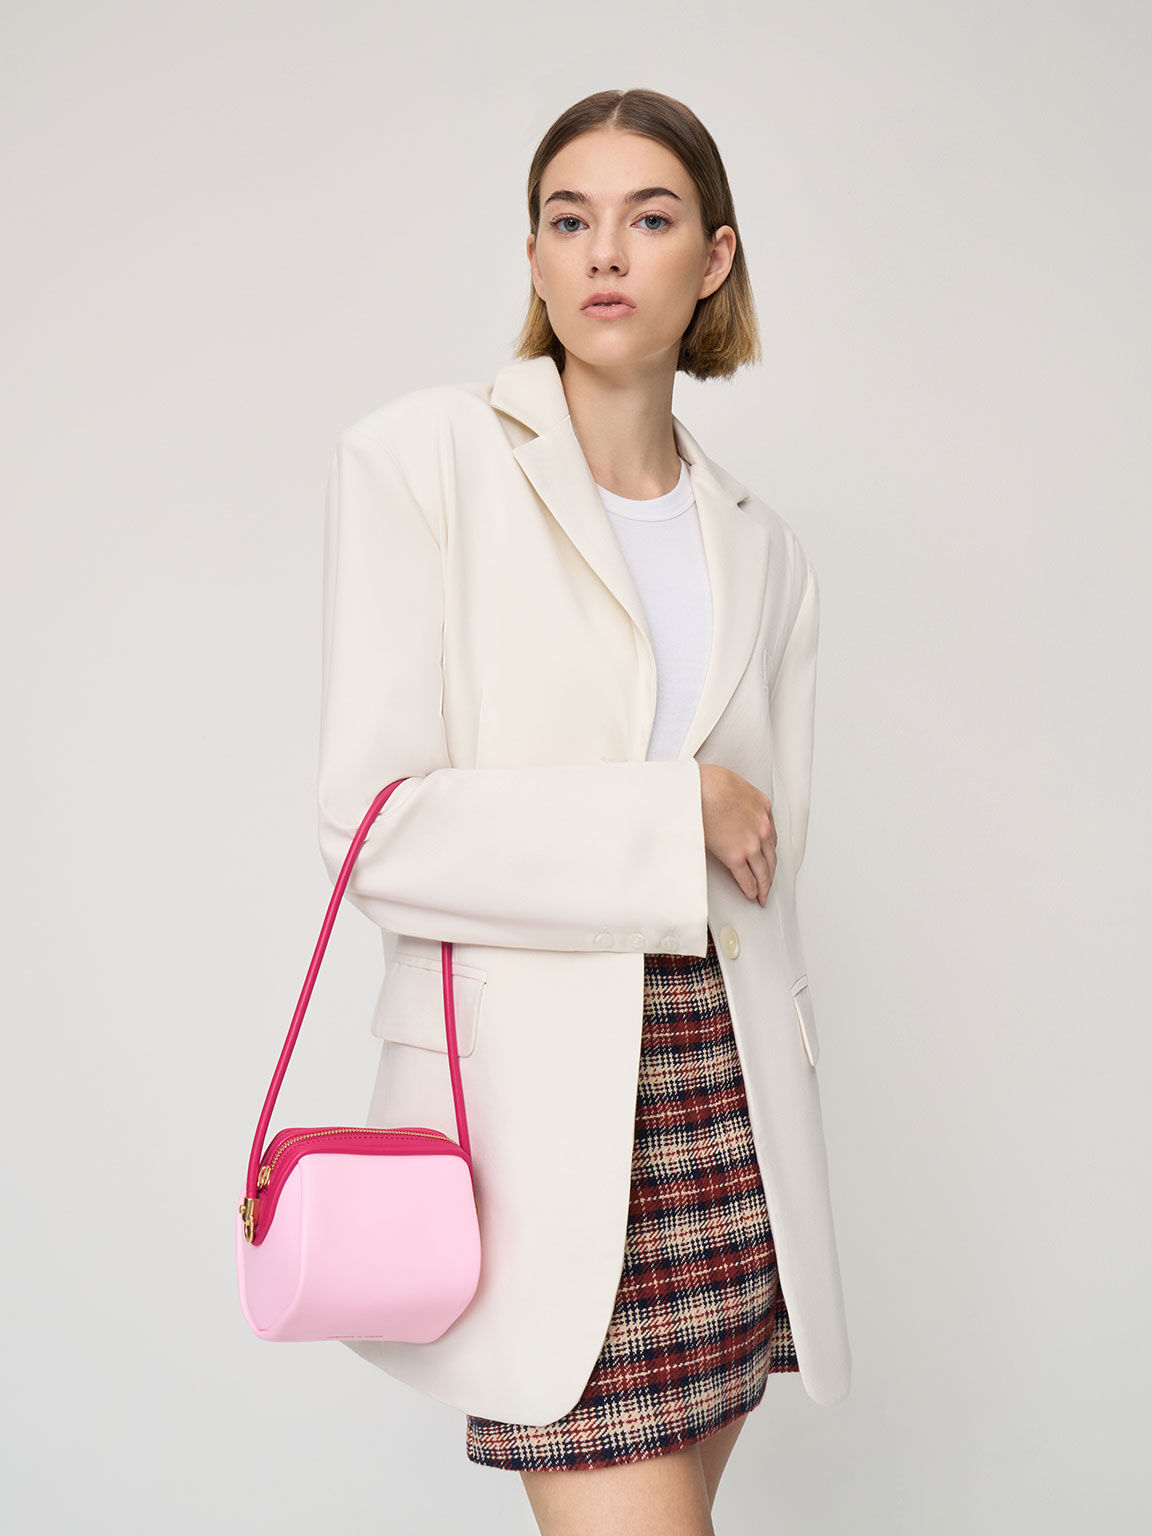 Ridley Chain-Link Boxy Bag, Pink, hi-res